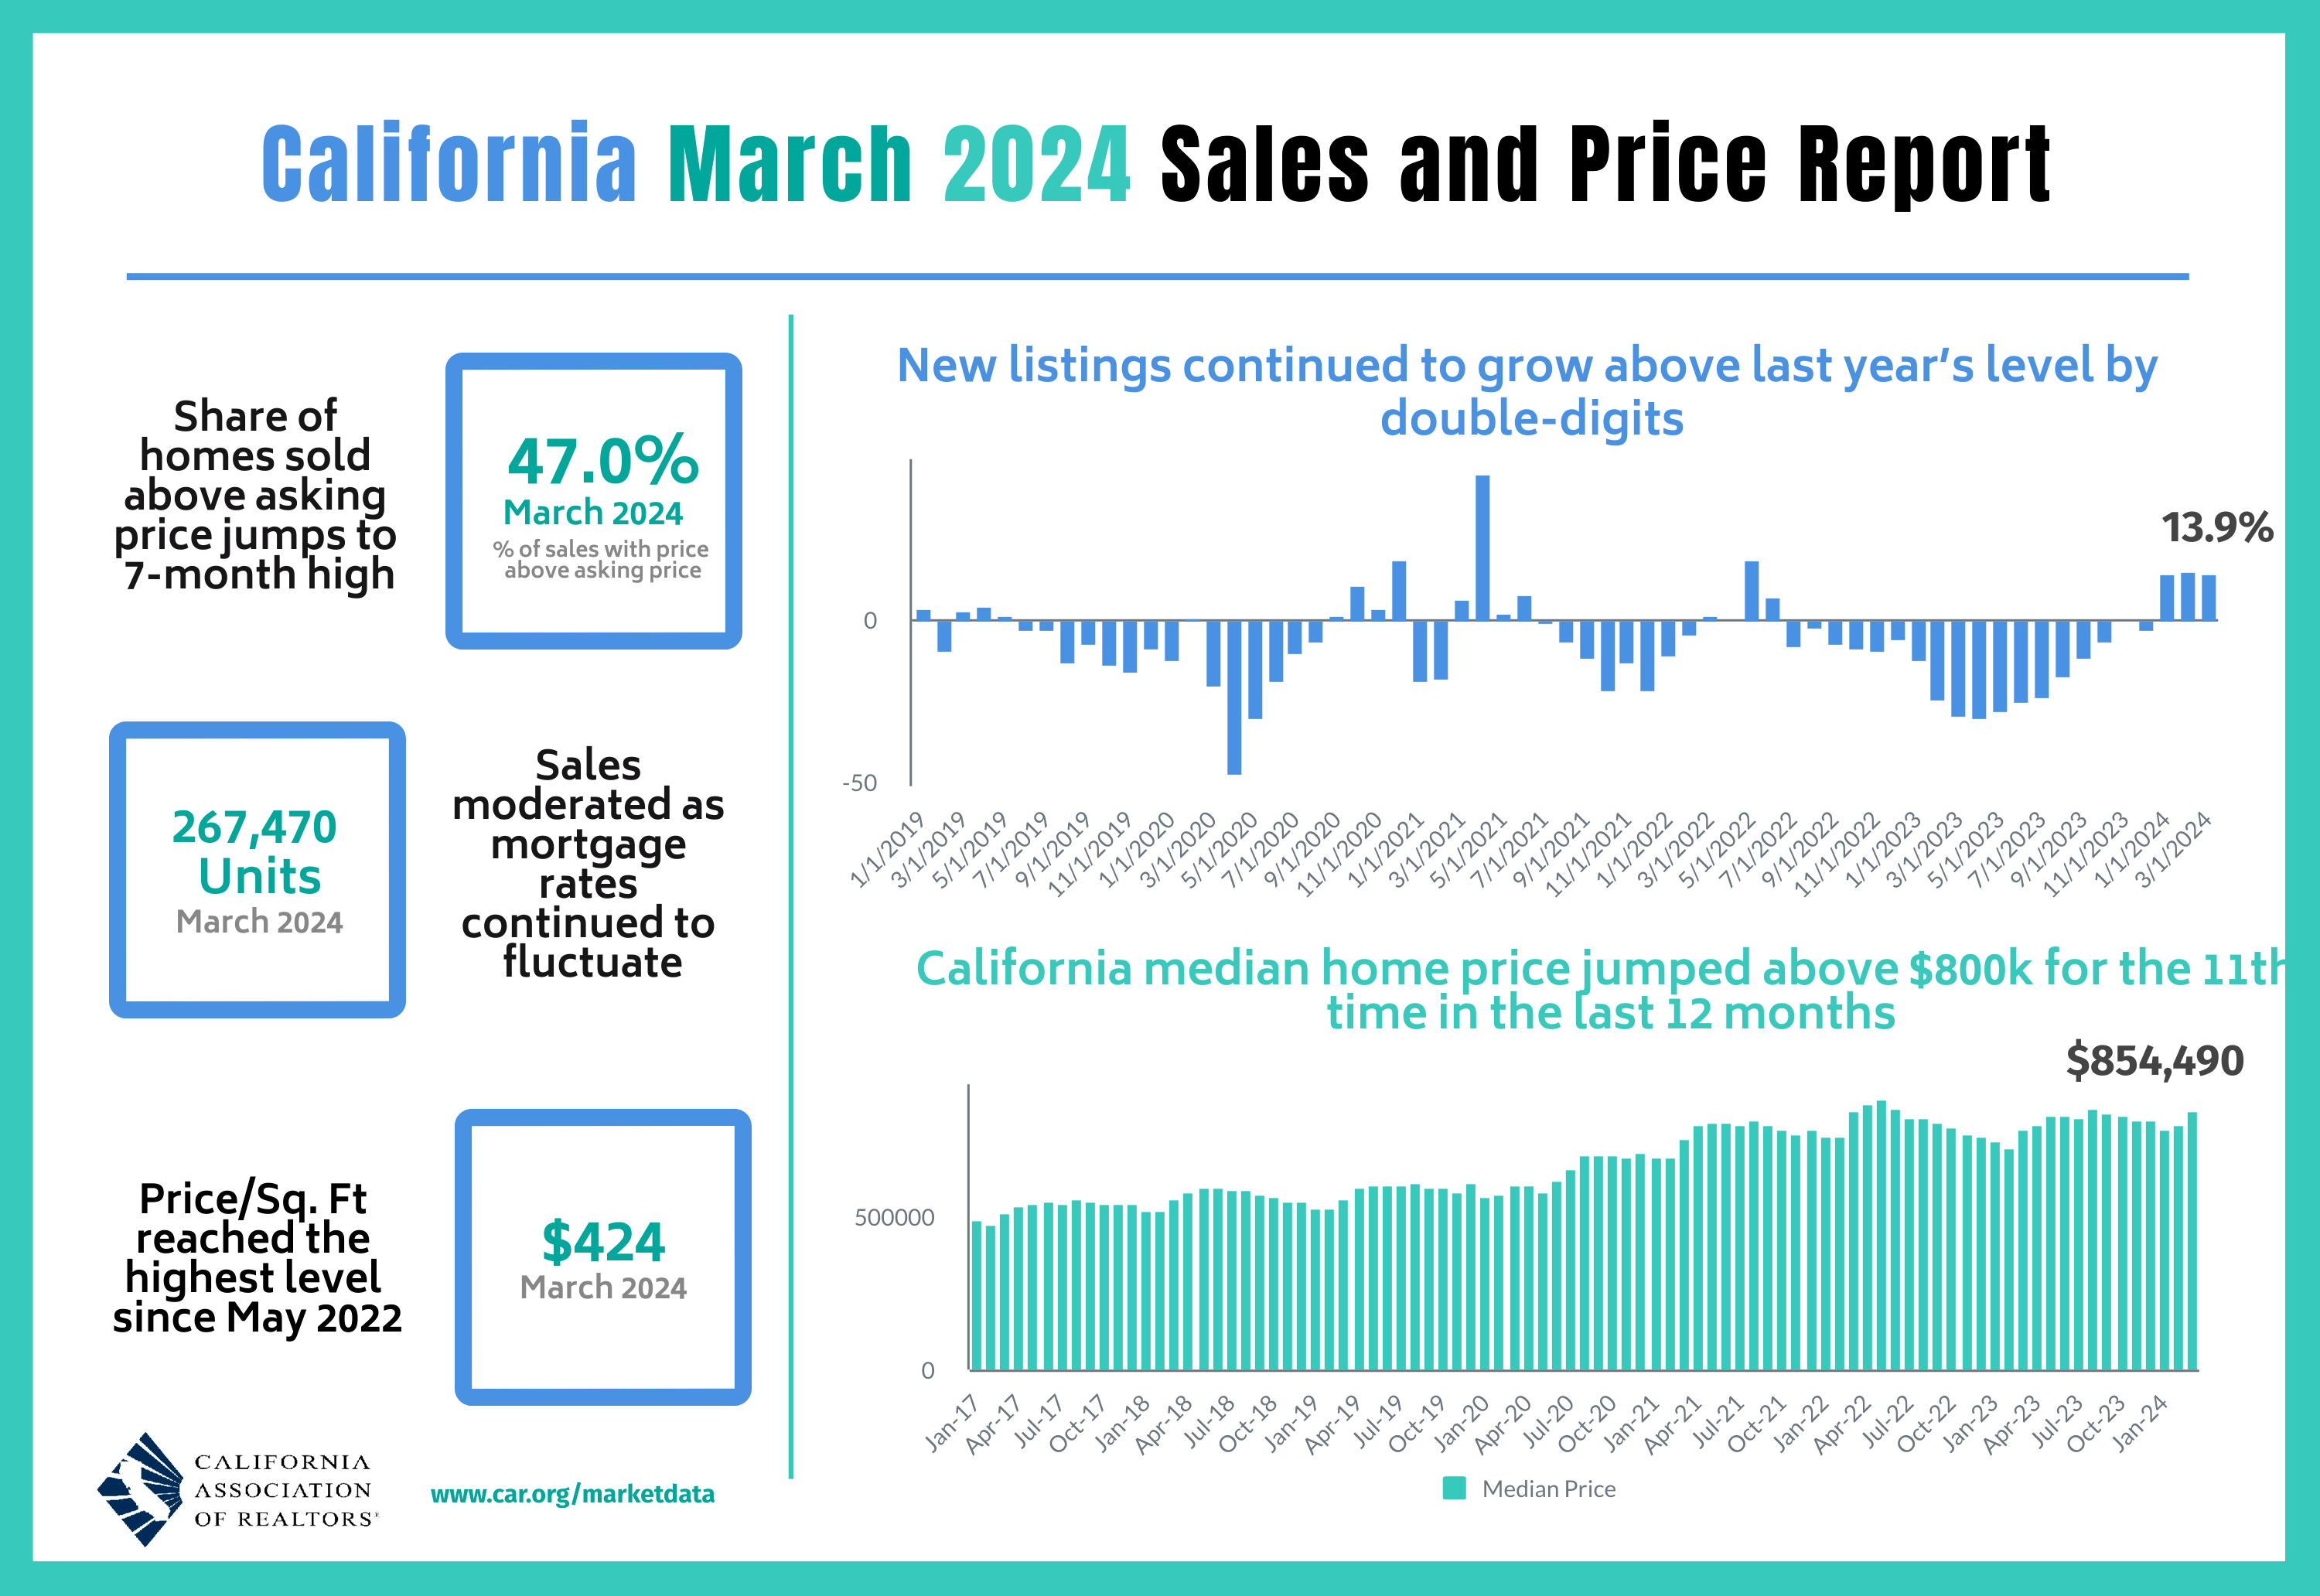 California March 2024 Sales and Price Report